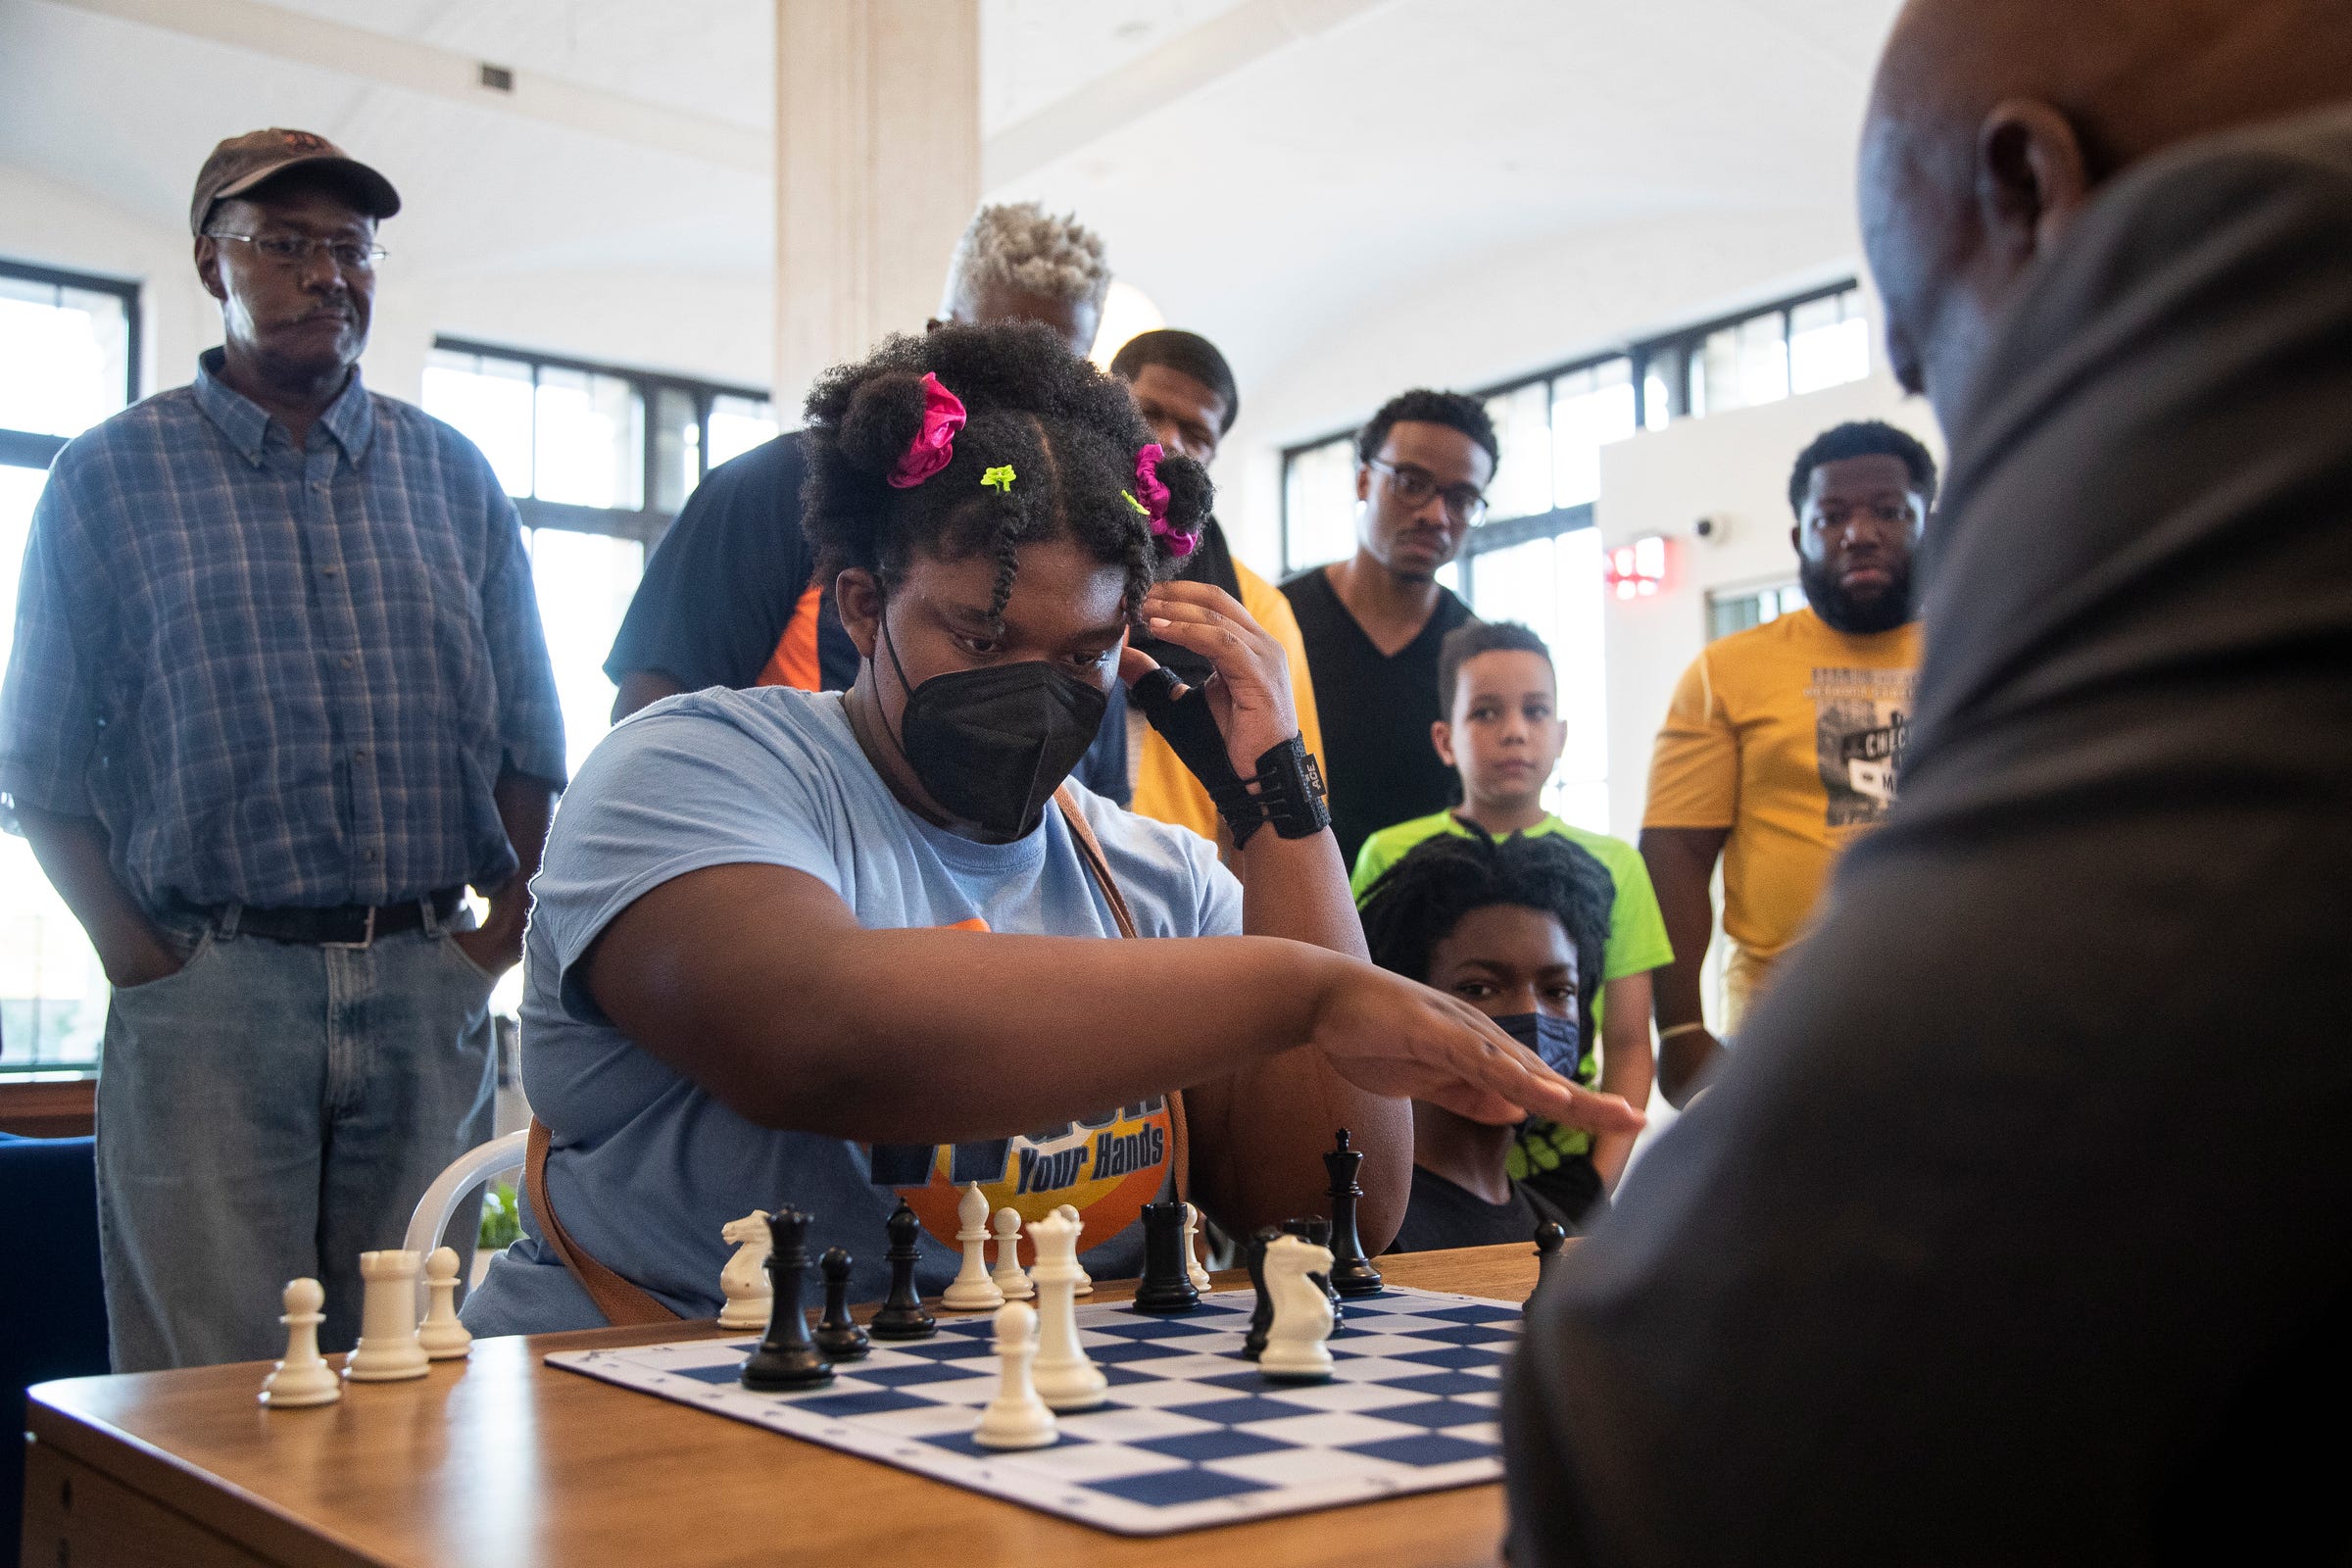 17-year-old Milwaukee student earns the third-highest chess title since 2013